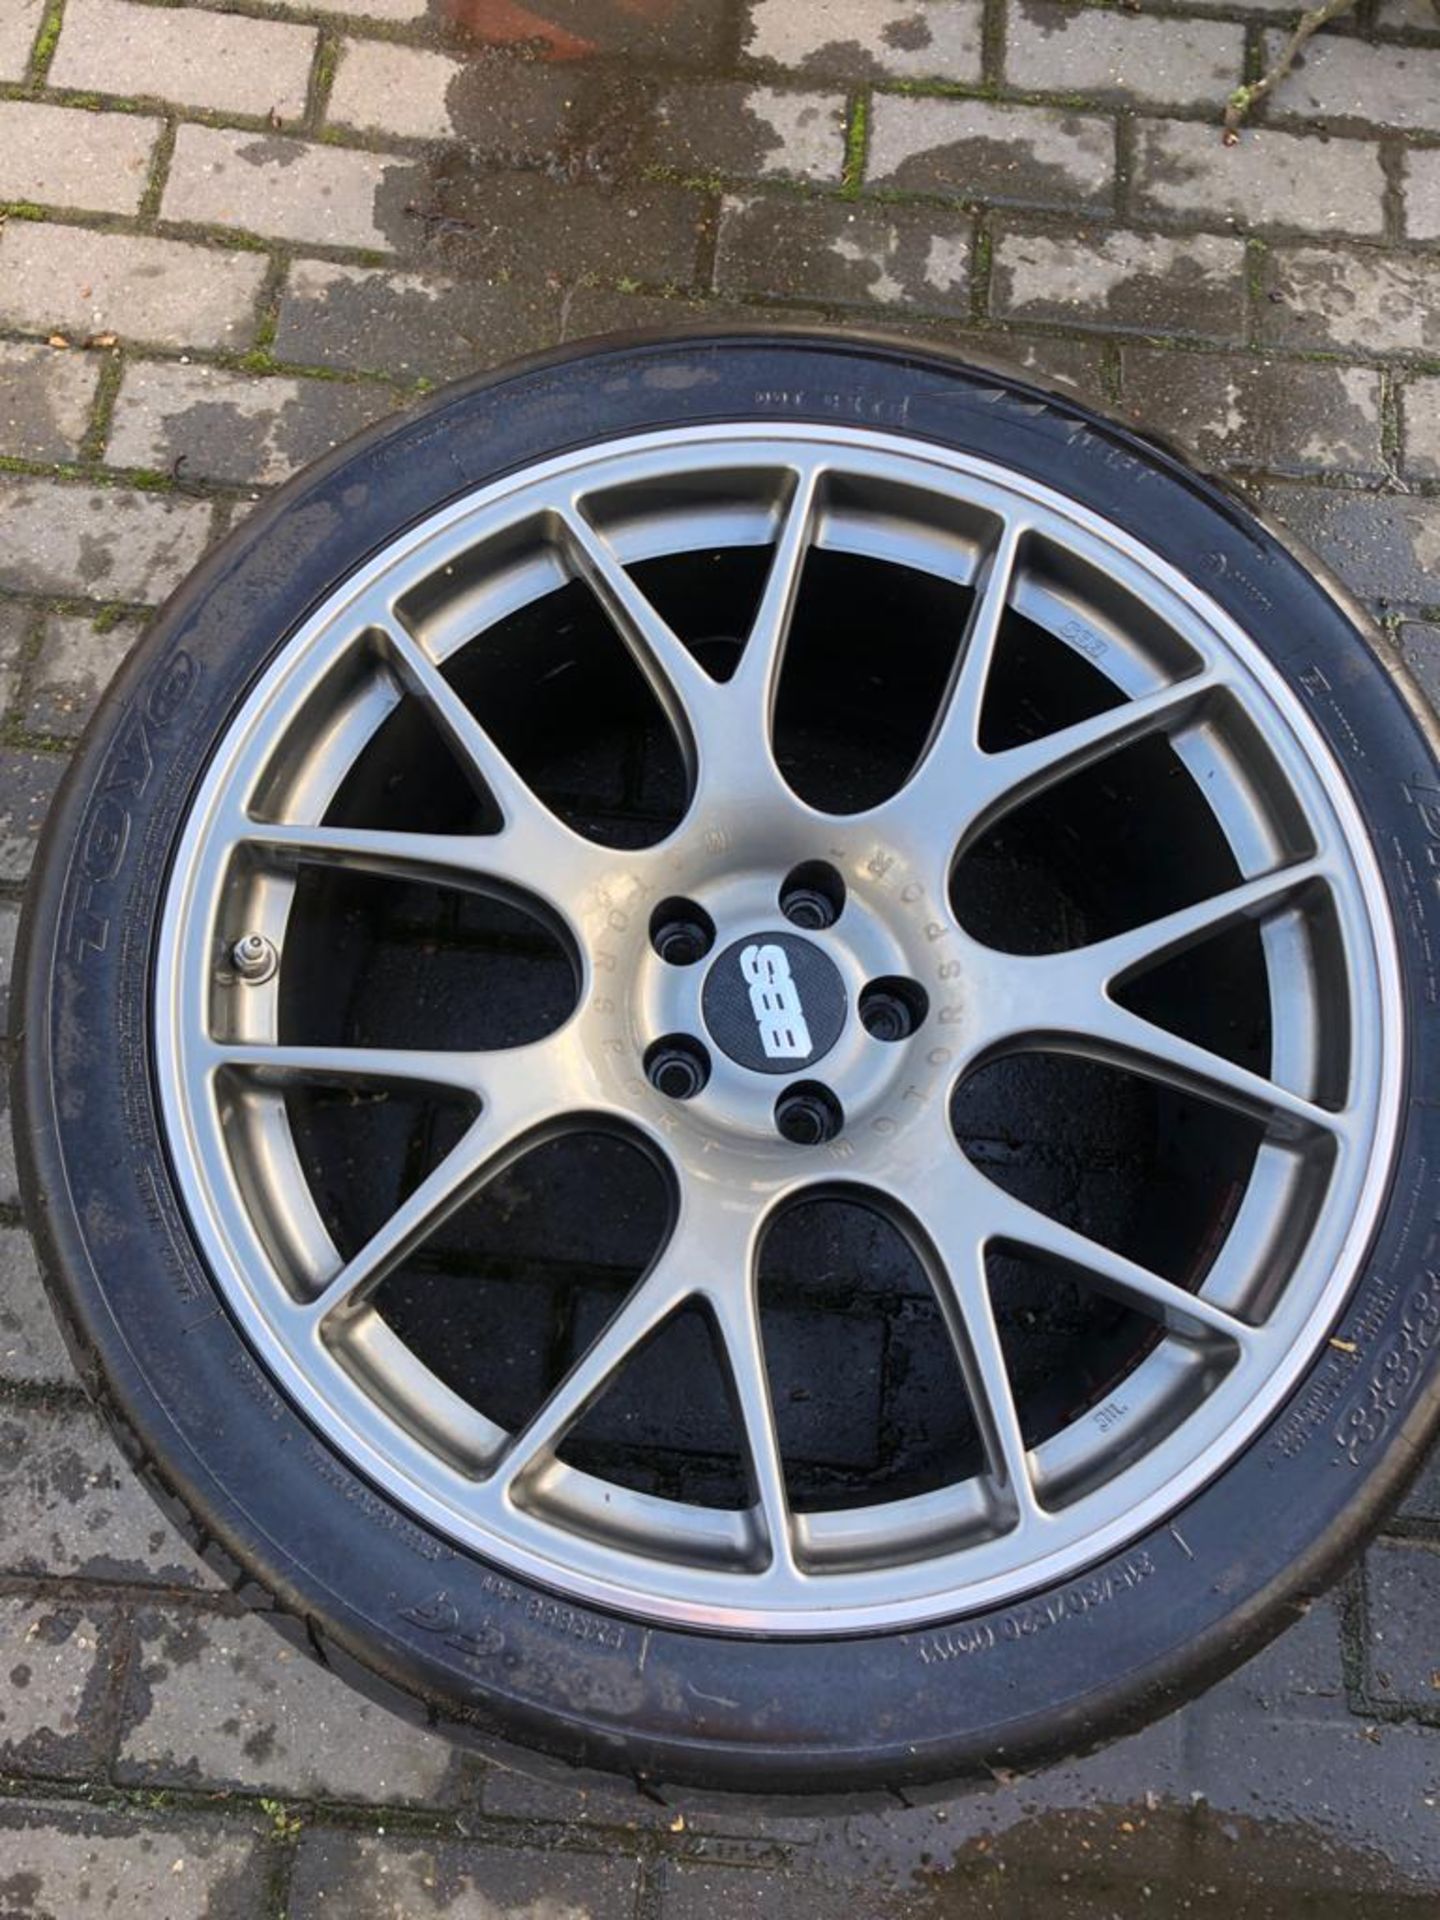 GENUINE BBS CH-R 20" SATIN ANTHRACITE NÜRBURGRING ALLOY WHEELS SET OF 4, TOYO R888 TYRES £3400 NEW - Image 5 of 17